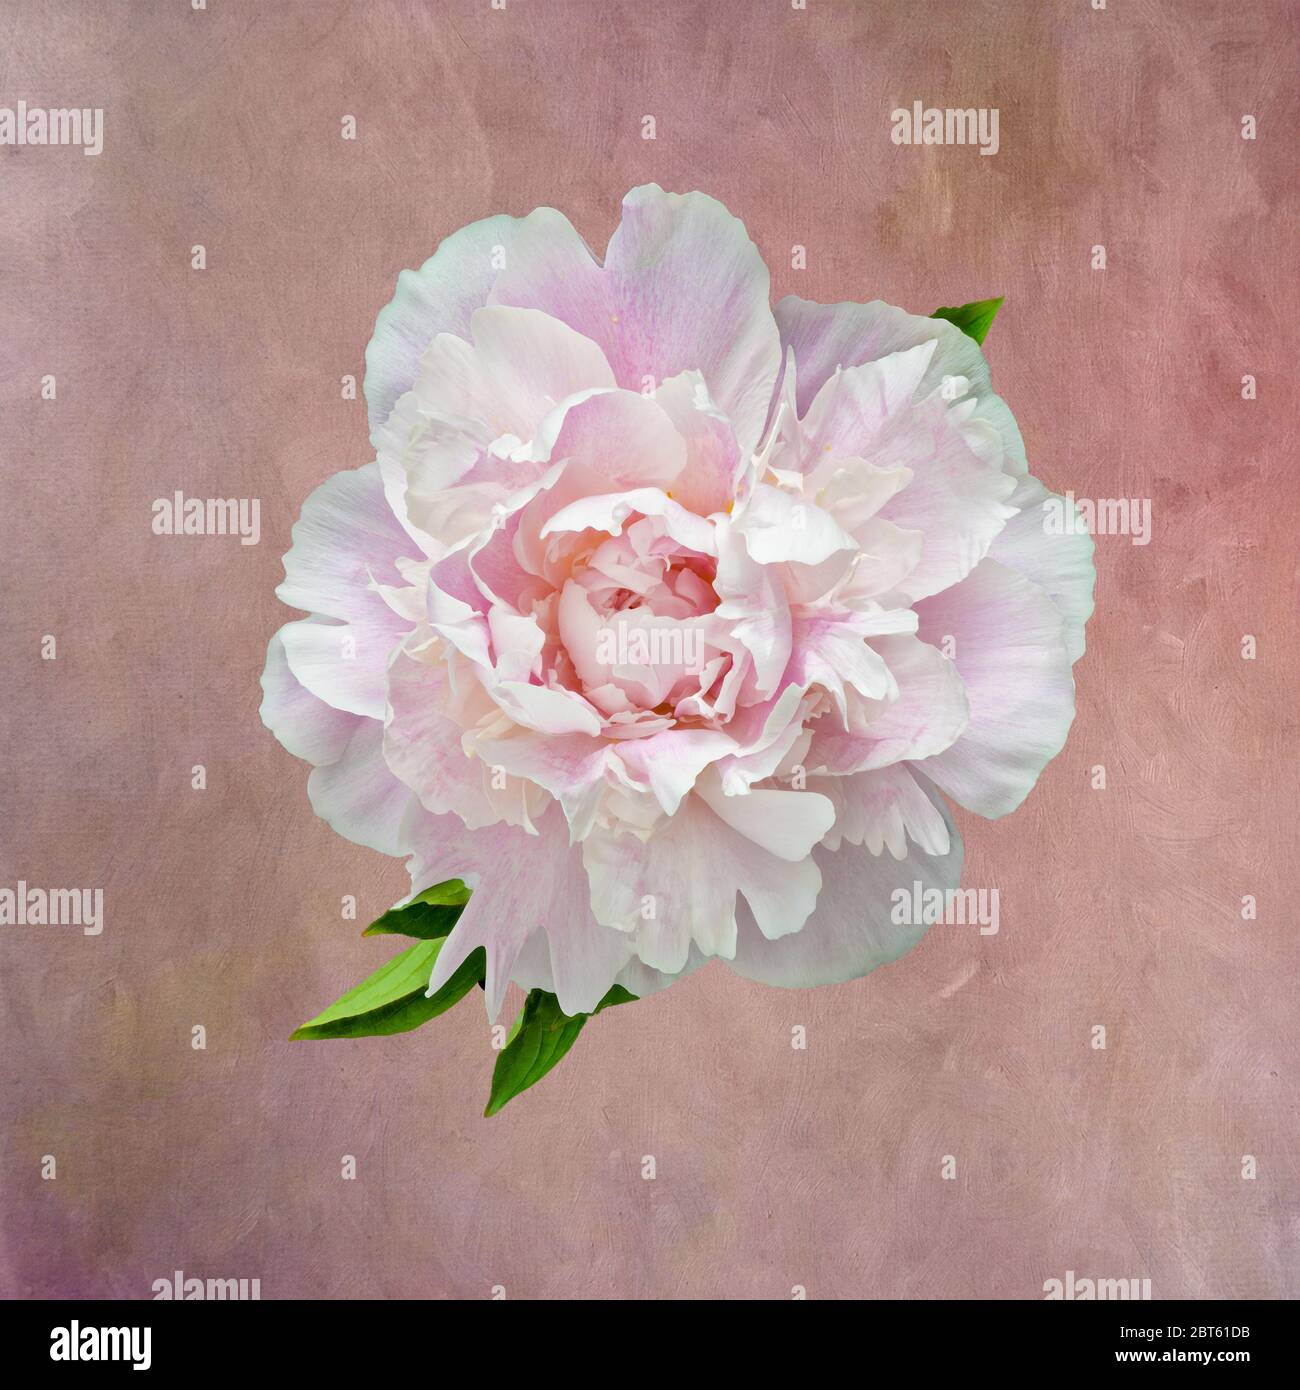 isolated single pink white peony blossom, vintage painting style,textured canvas or paper background, fine art still life color macro,single isolated Stock Photo